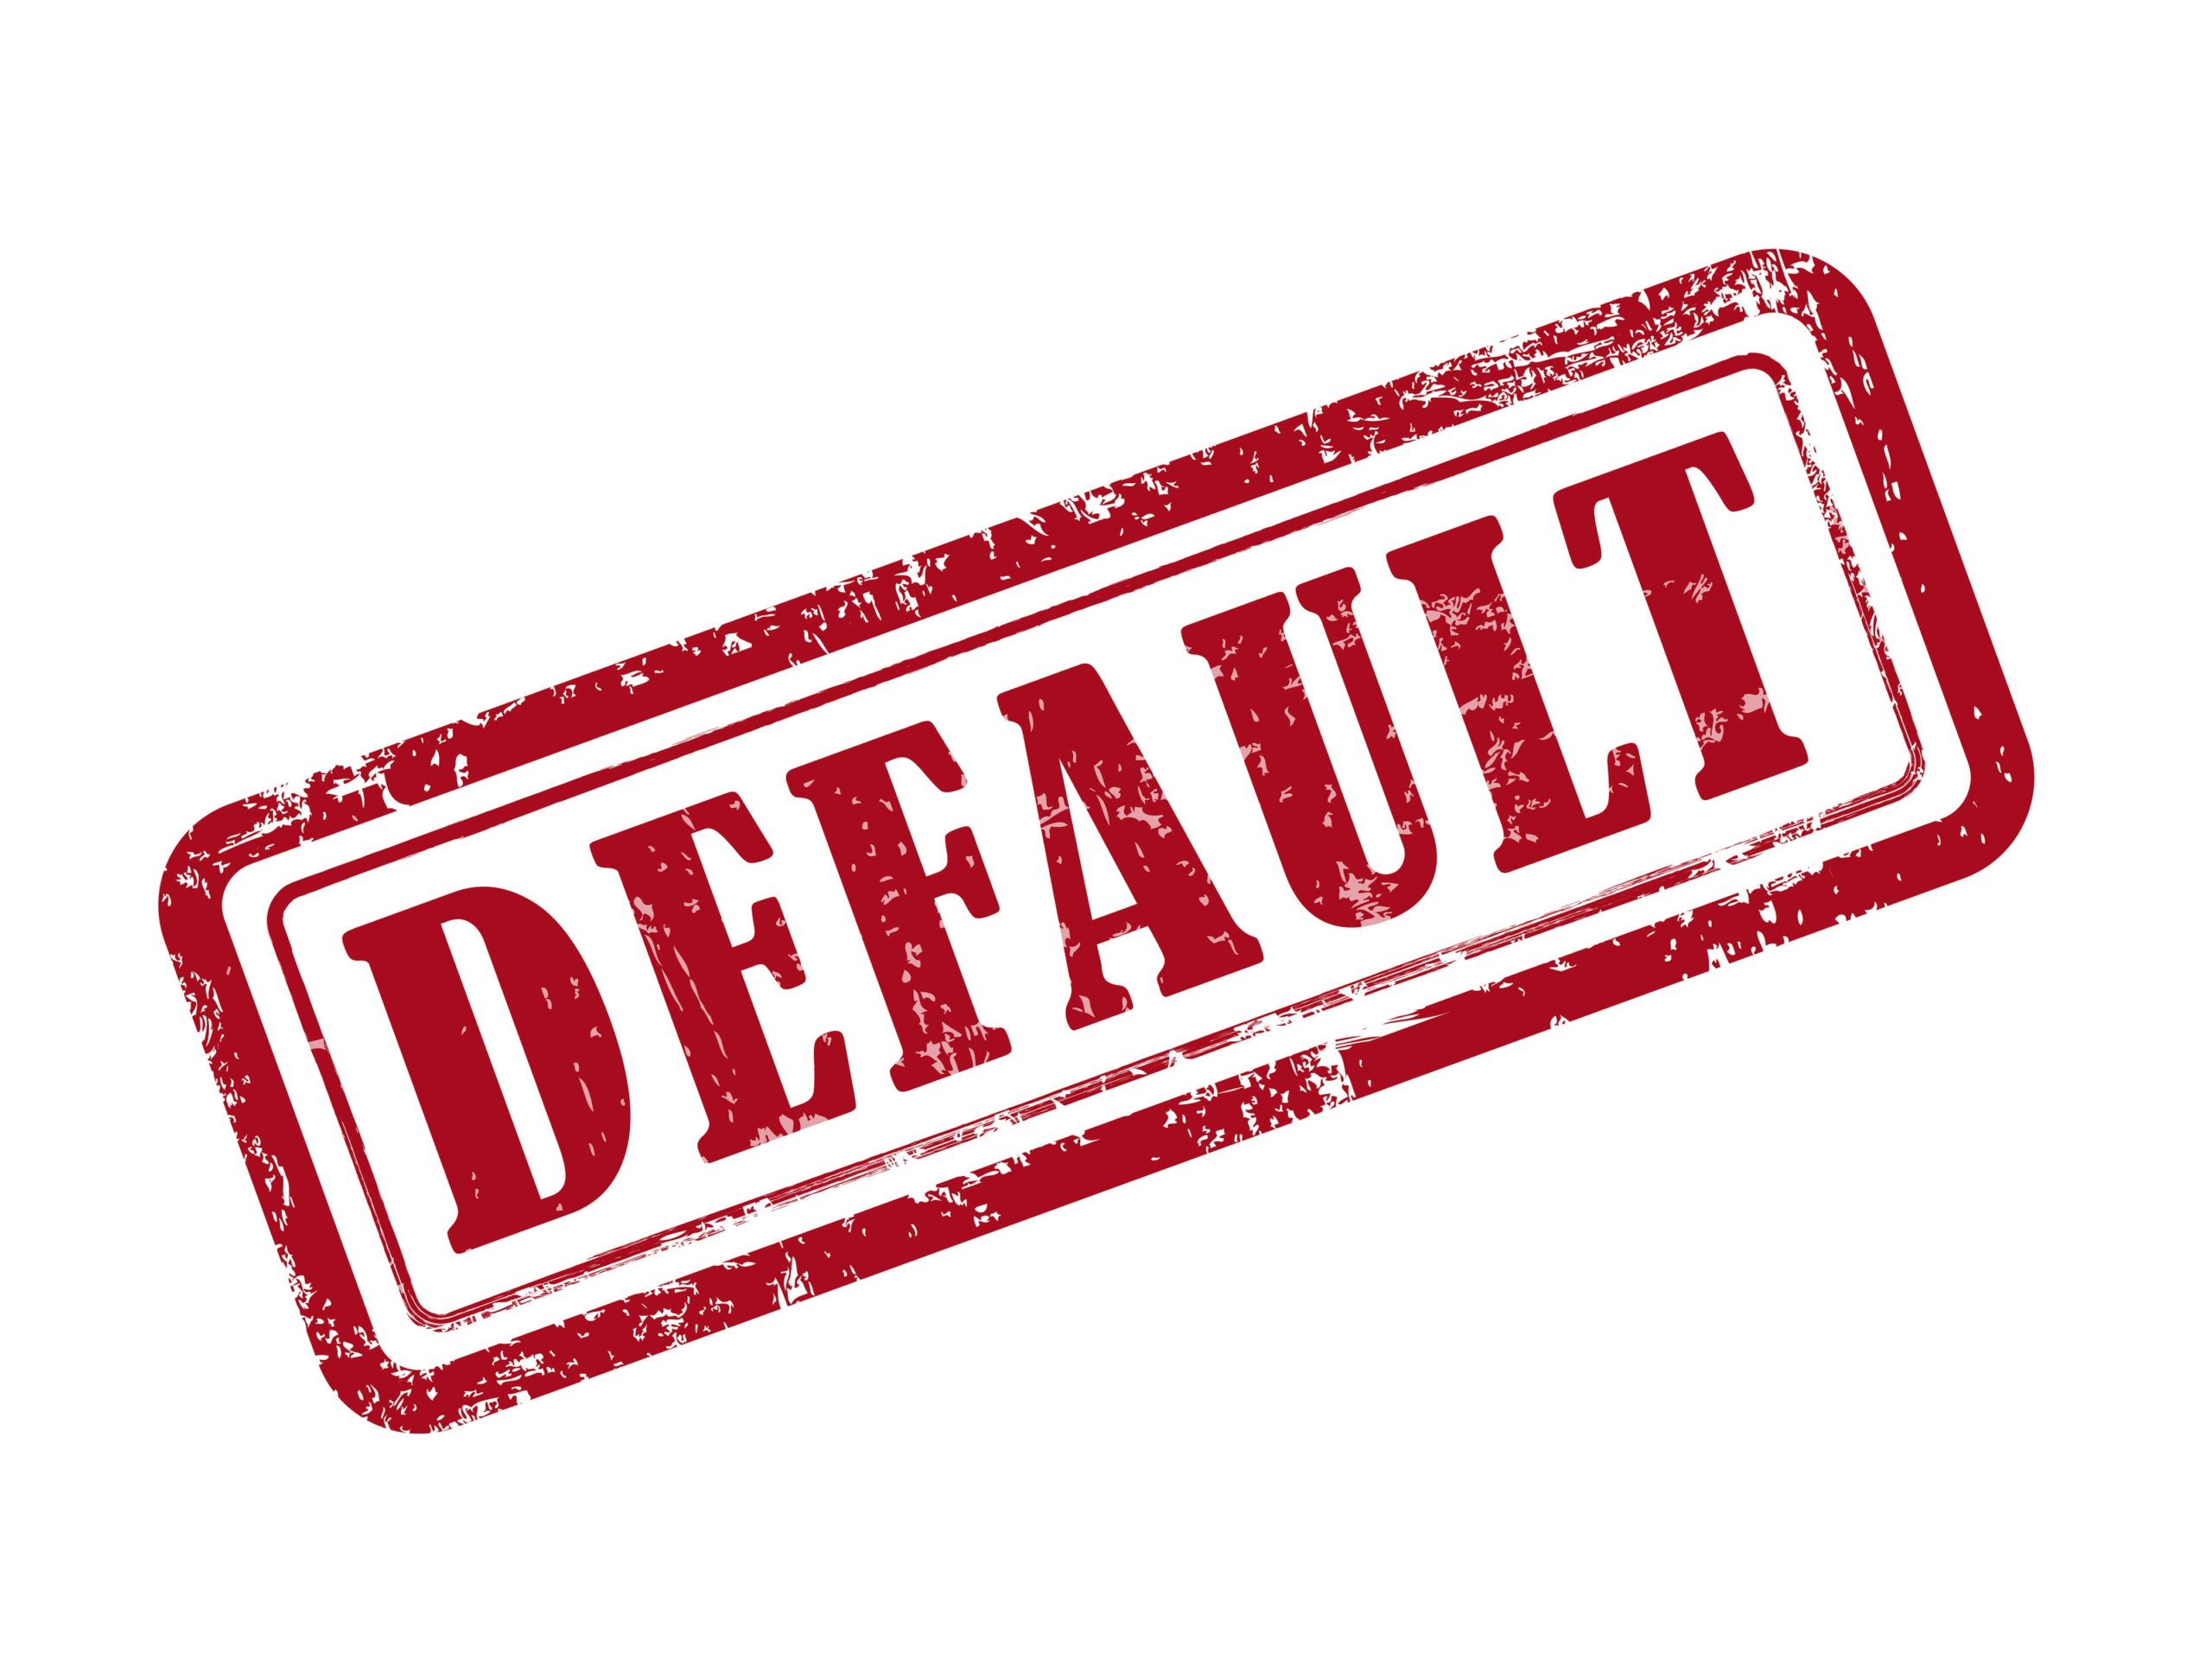 What does default mean?